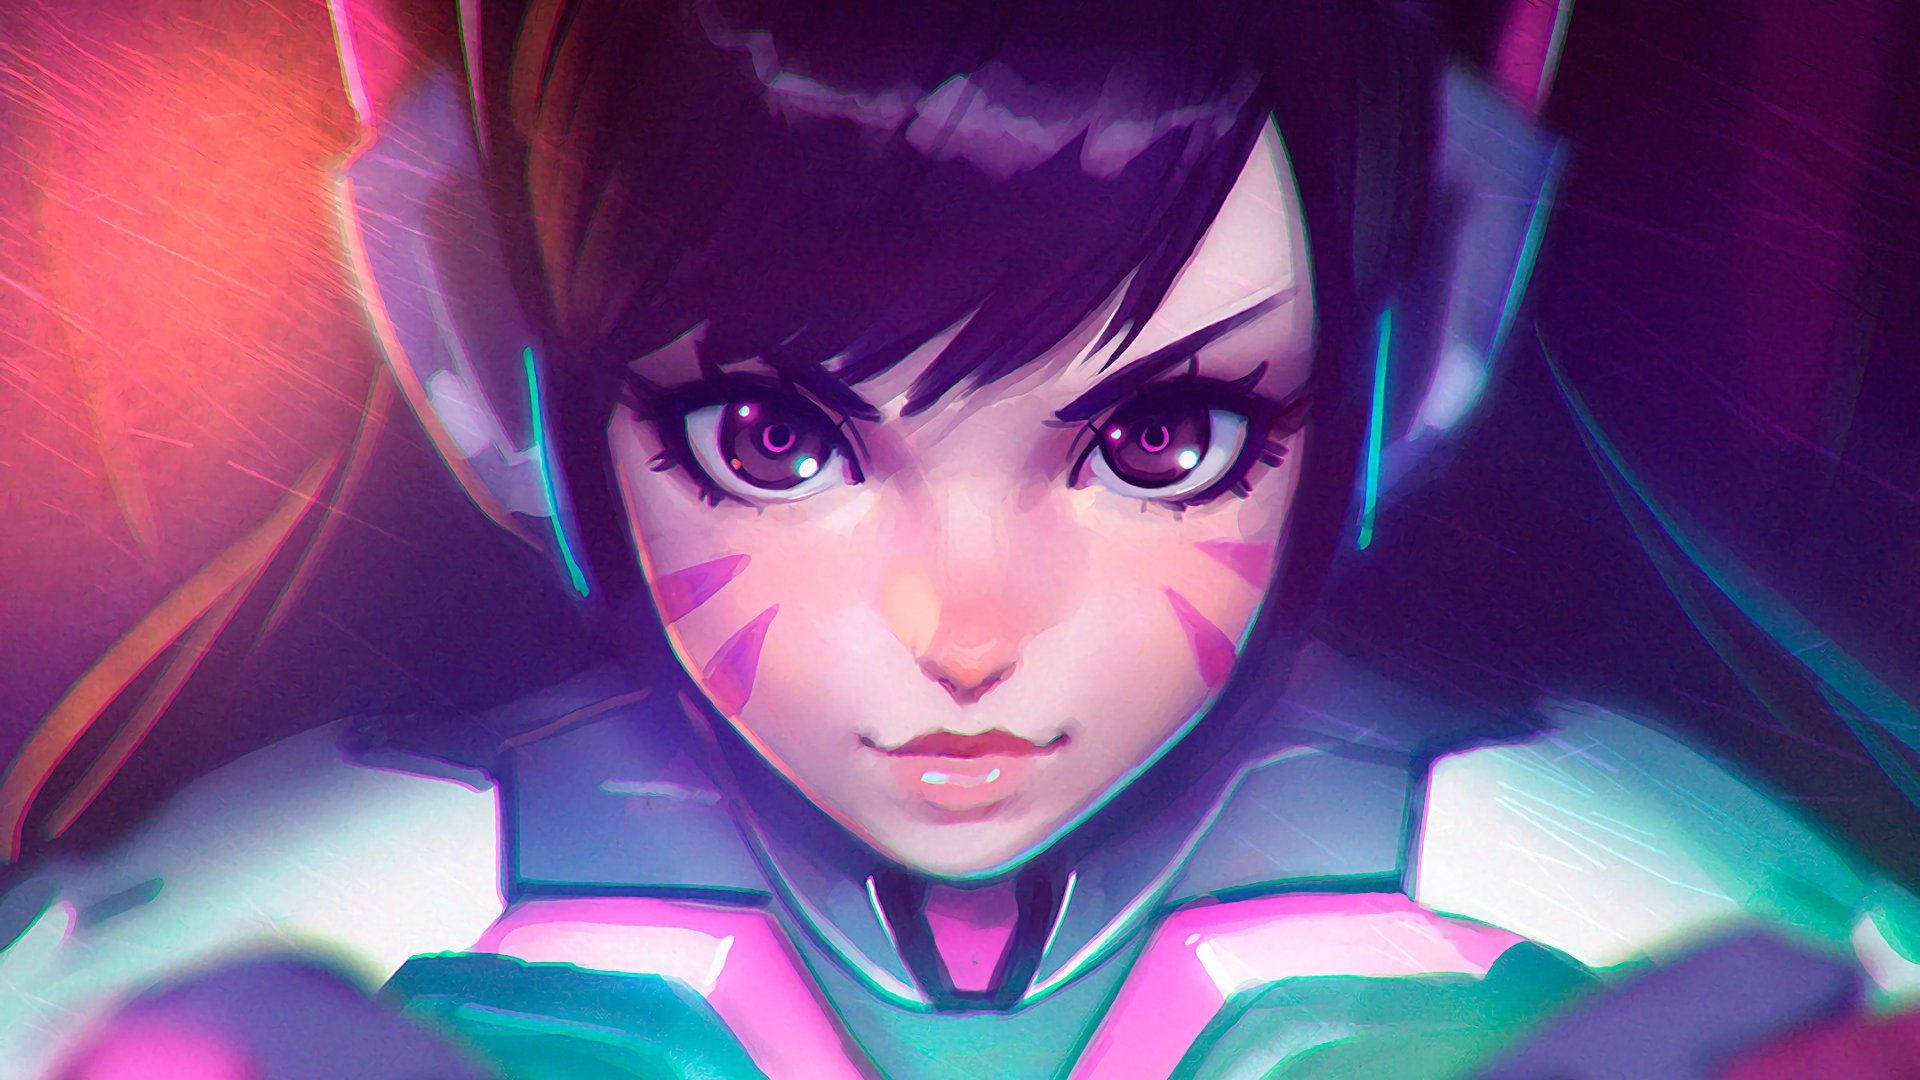 Top 999+ Dva Wallpapers Full HD, 4K✅Free to Use